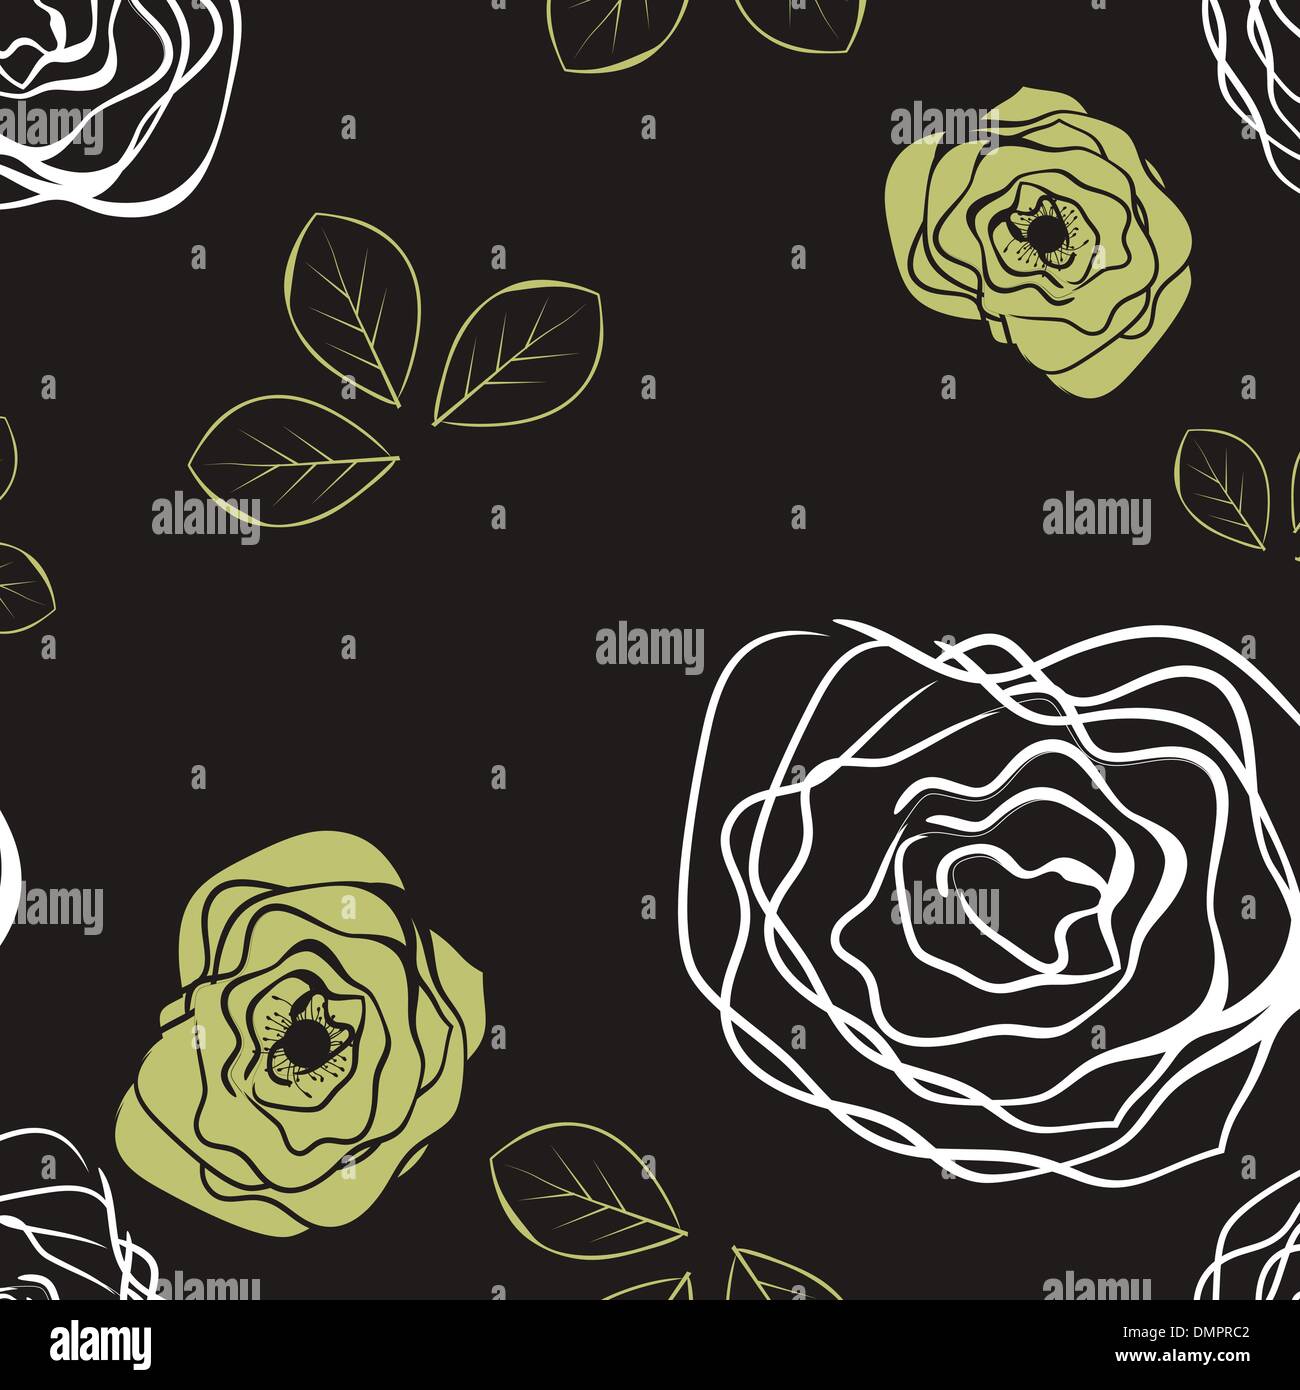 roses patterns,floral ,seamless pattern,vectors Stock Vector